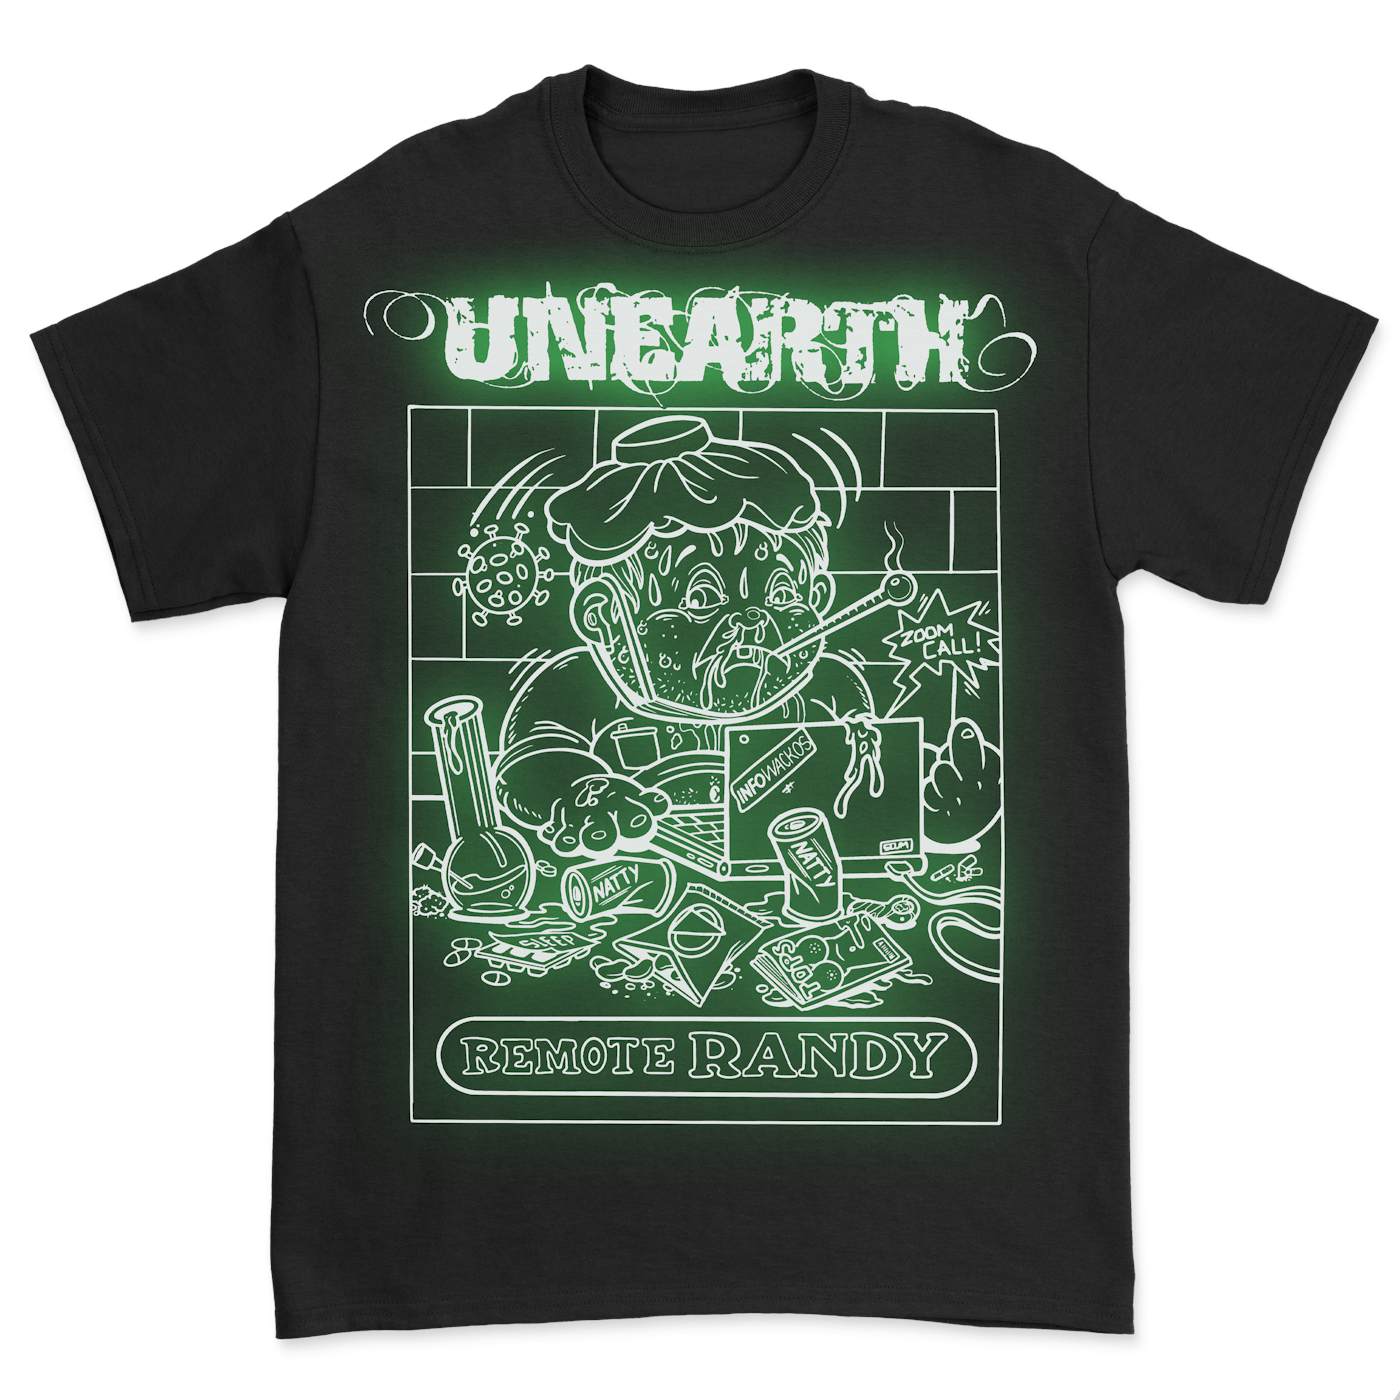 Unearth "Remote Randy" Glow in the Dark Tee